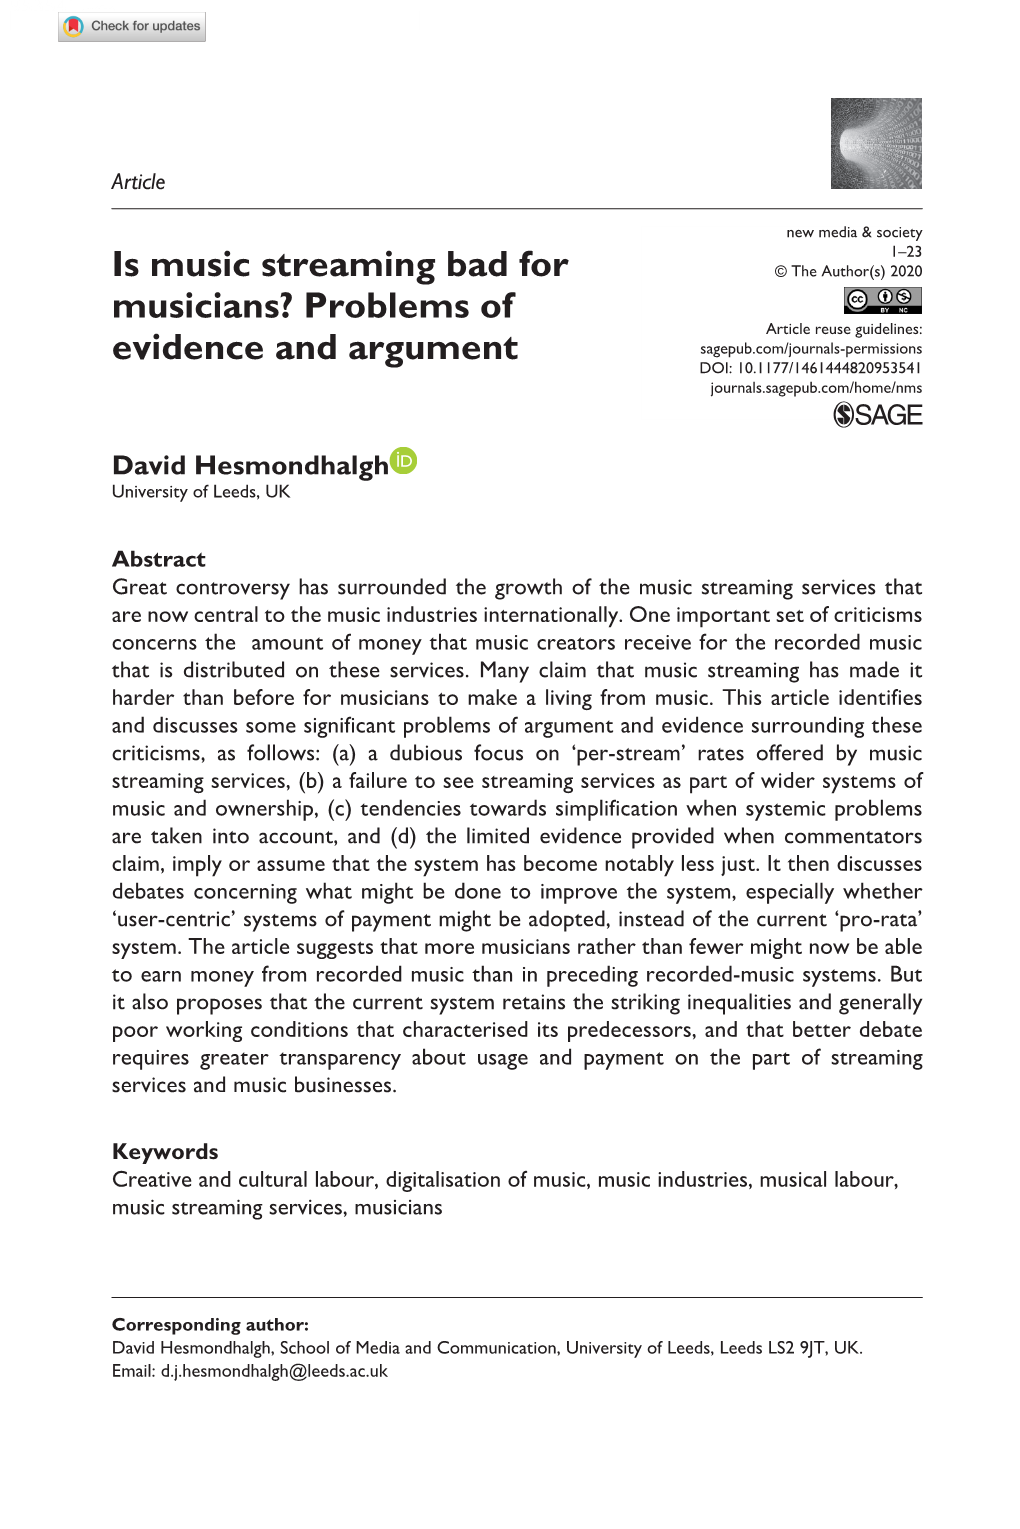 Is Music Streaming Bad for Musicians? Problems of Evidence